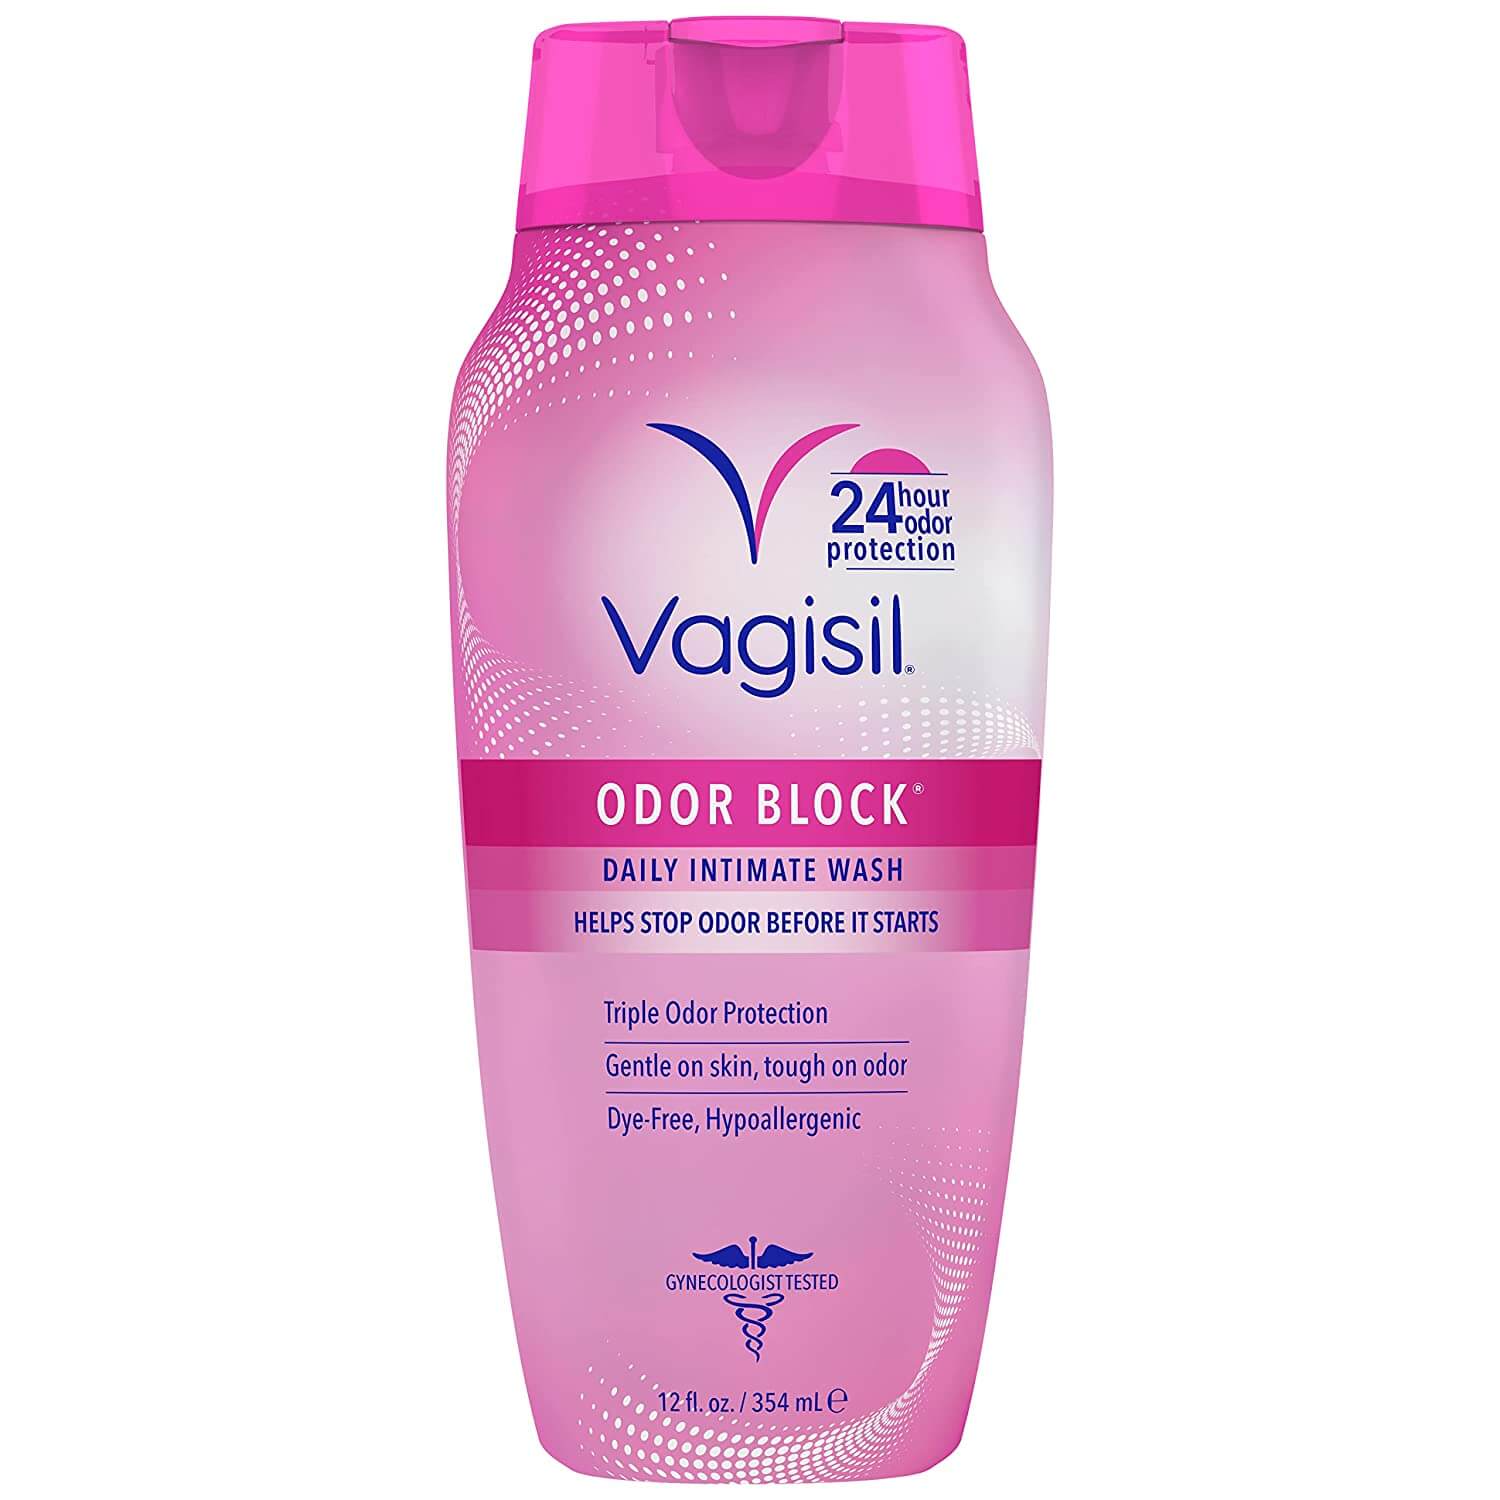 Can I Use Vagisil on My Dog?